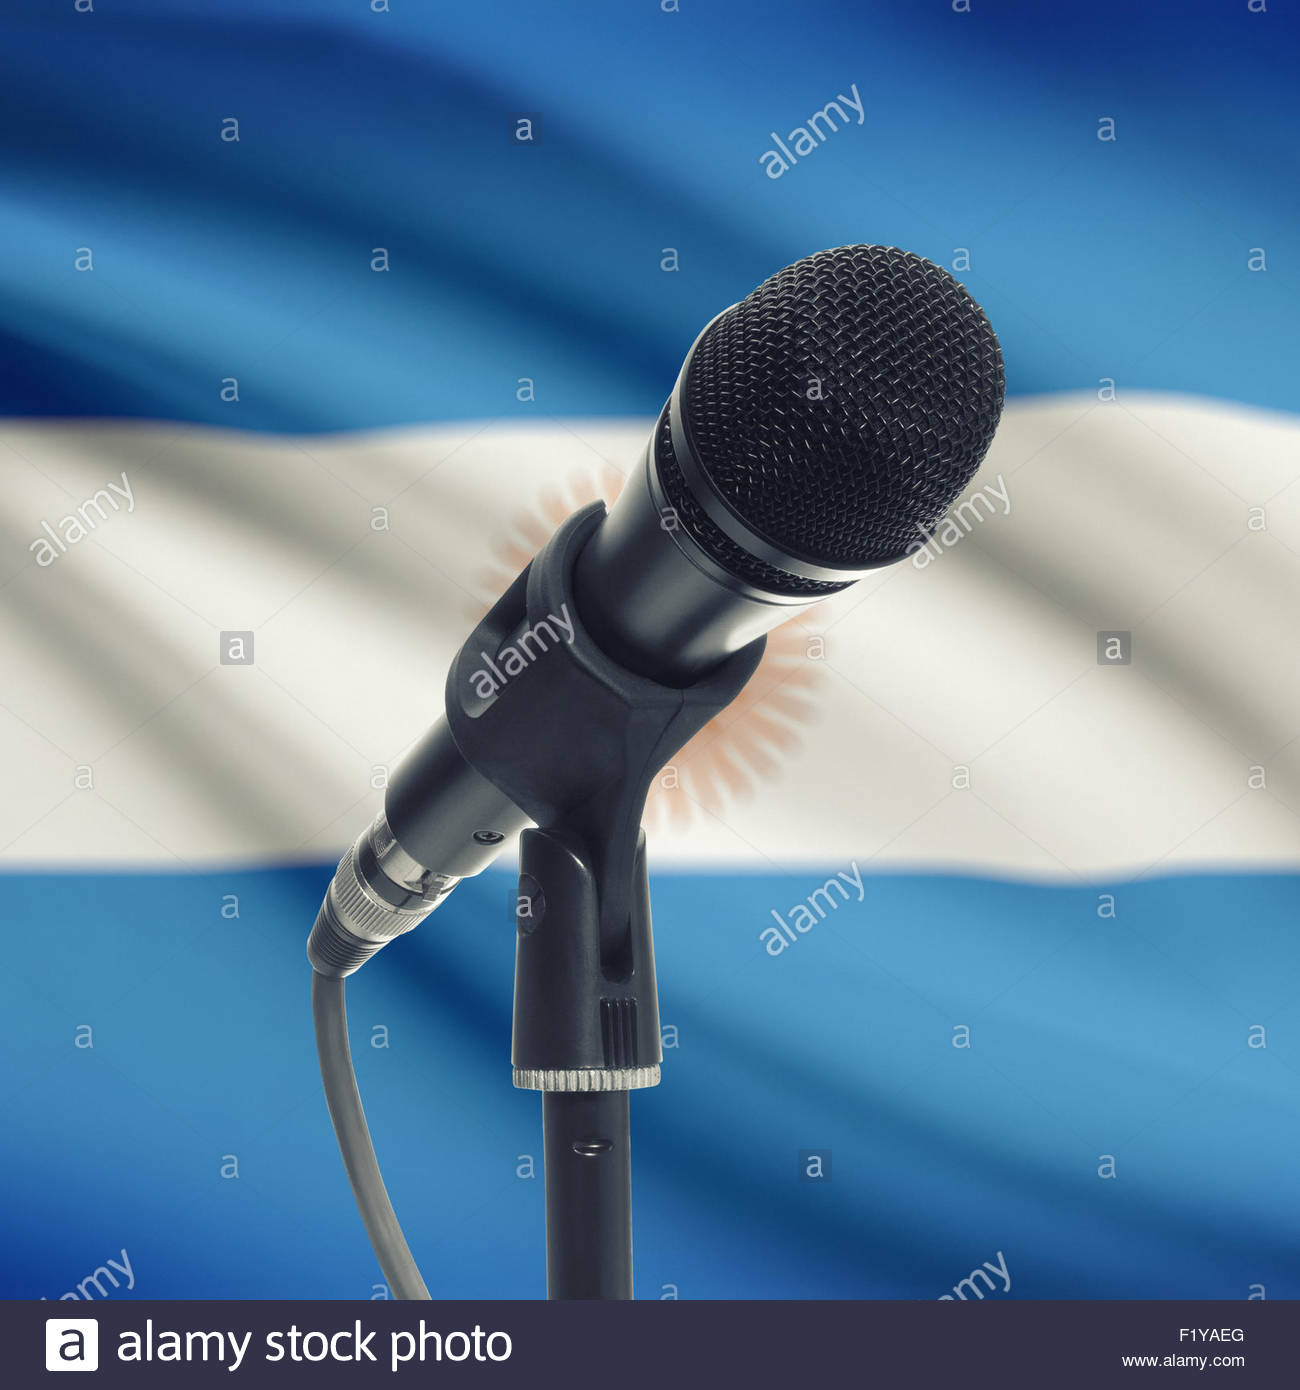 Microphone With National Flag On Background Series Argentina